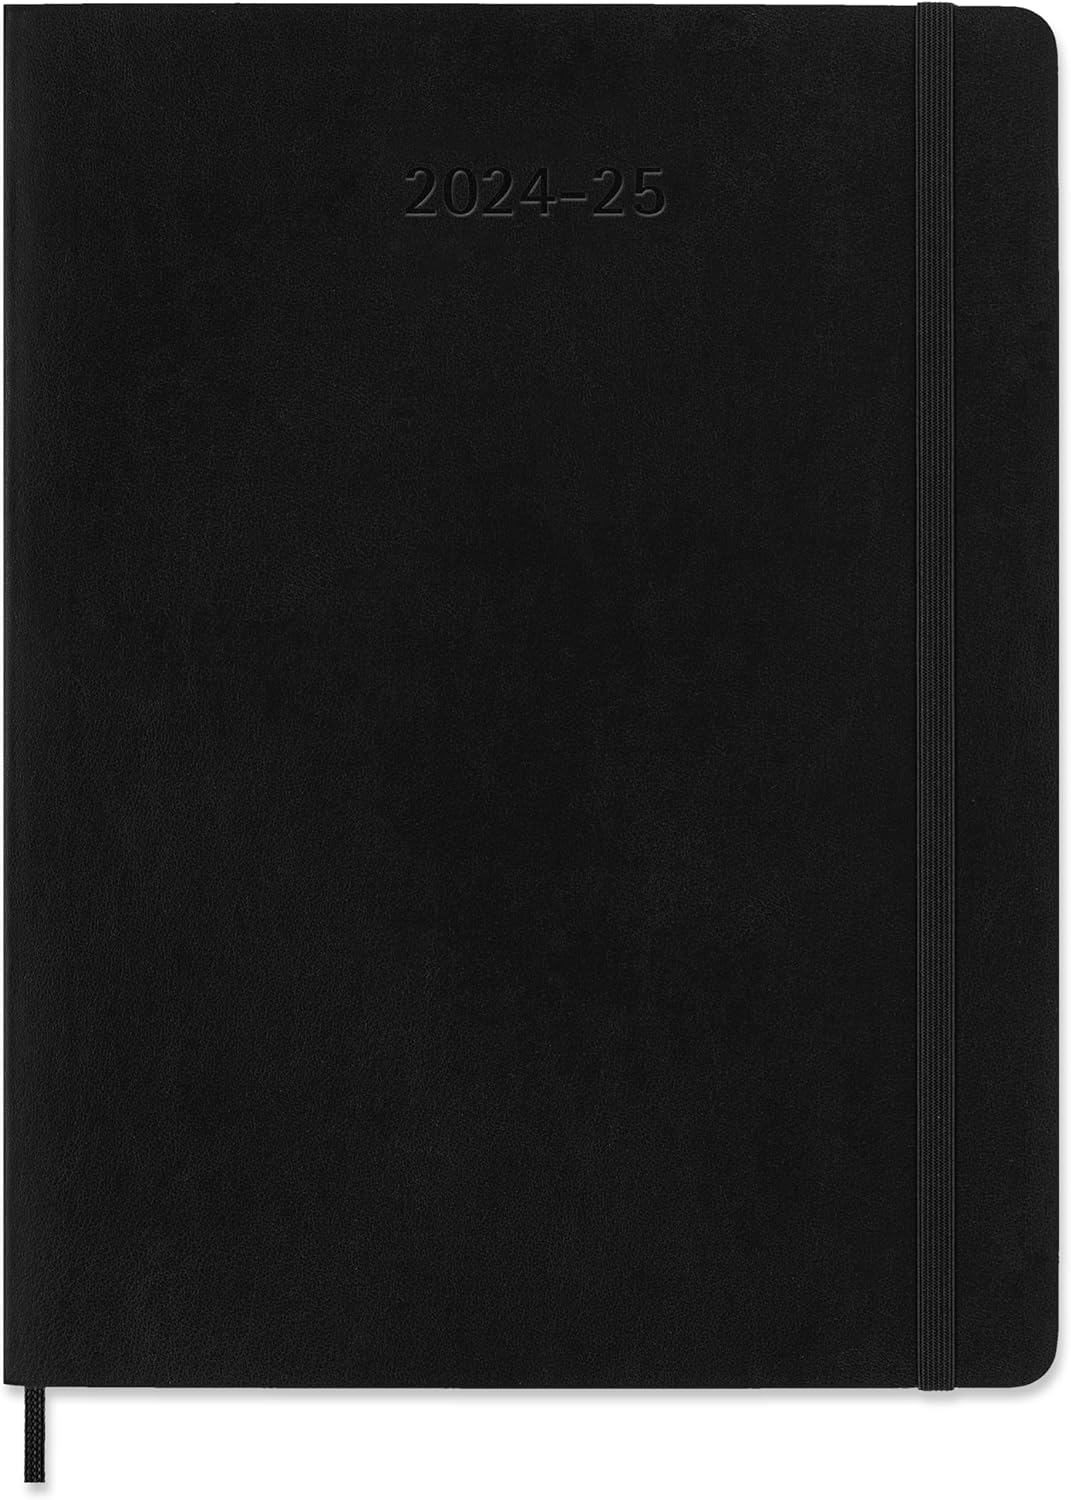 Agenda 2024/2025 - 18 Months Weekly Planner - Soft Cover, Extra Large - Black | Moleskine